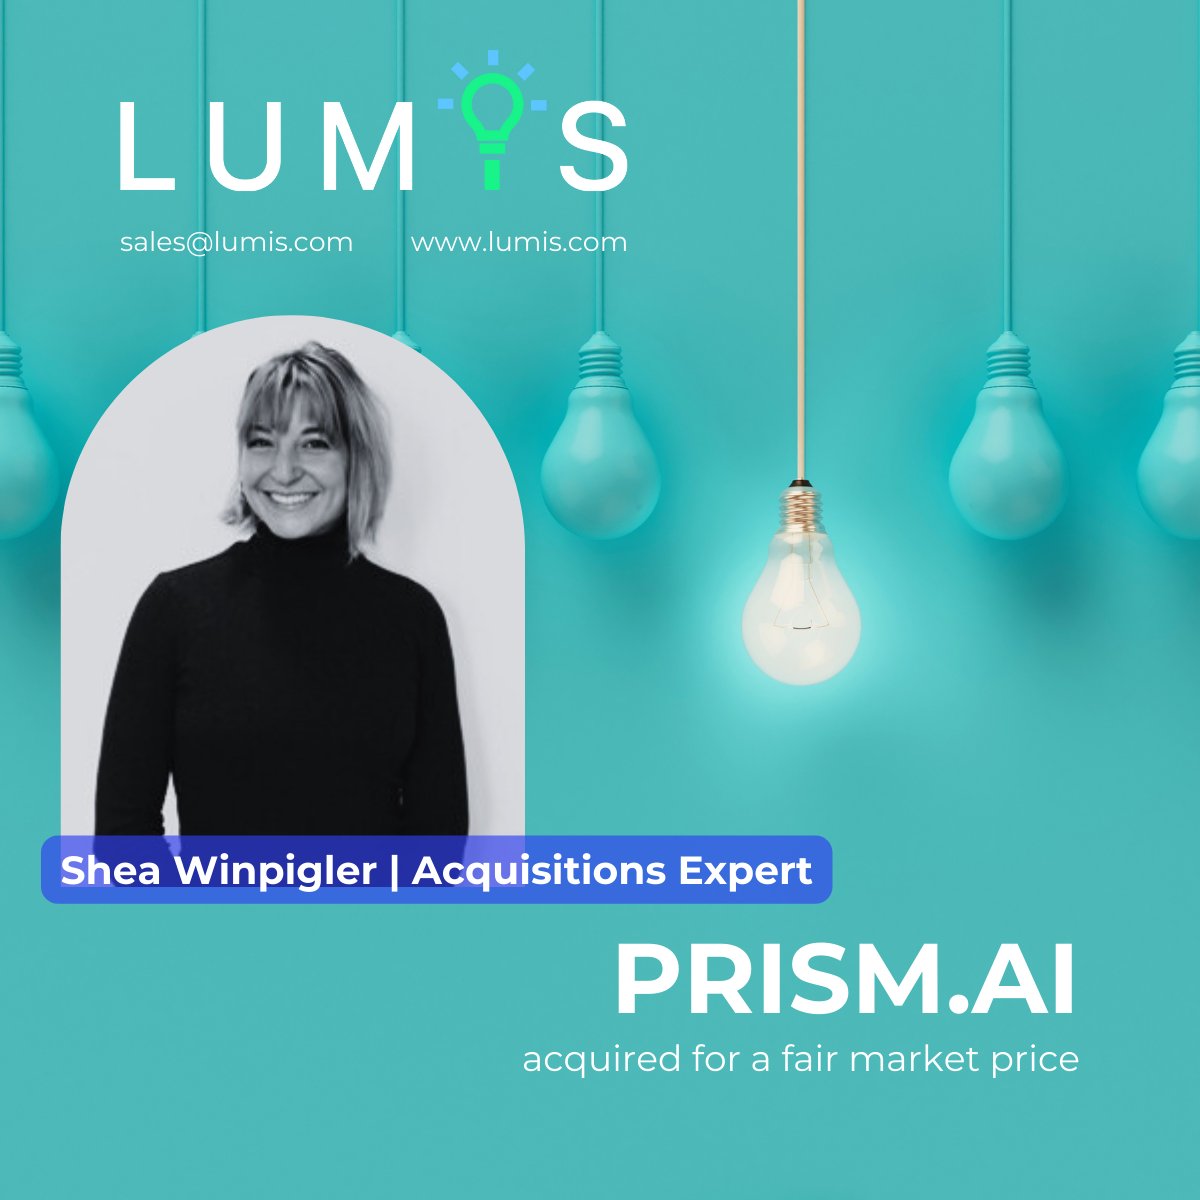 Prism.ai has been acquired. Congratulations to Shea and our client! #Lumis